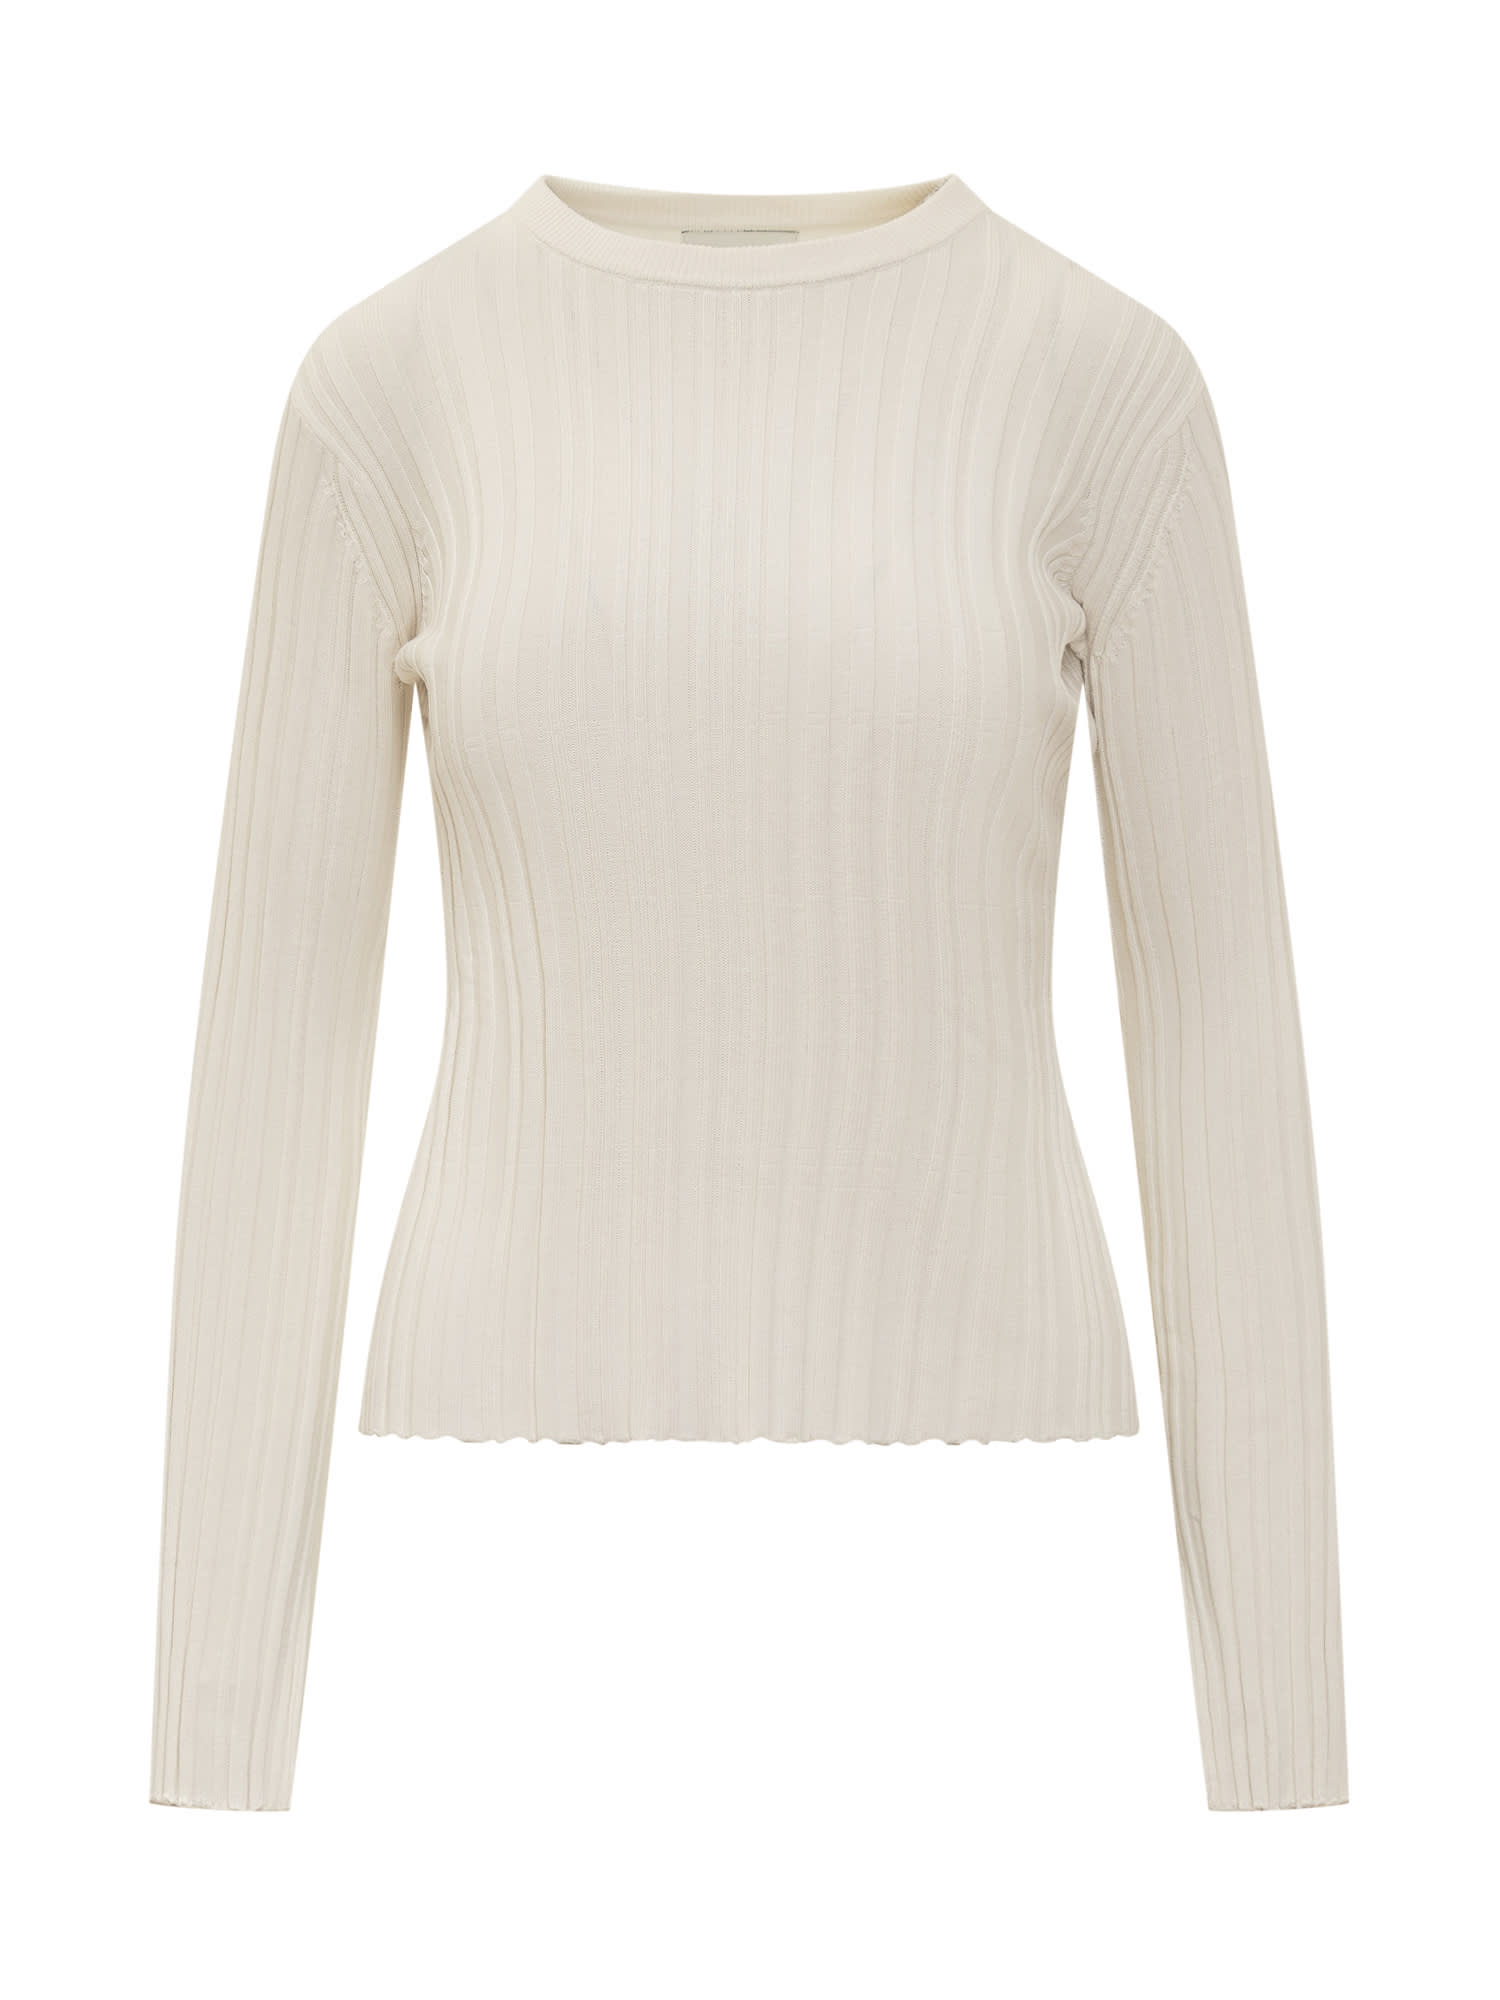 Loulou Studio Sweater In Rice Ivory